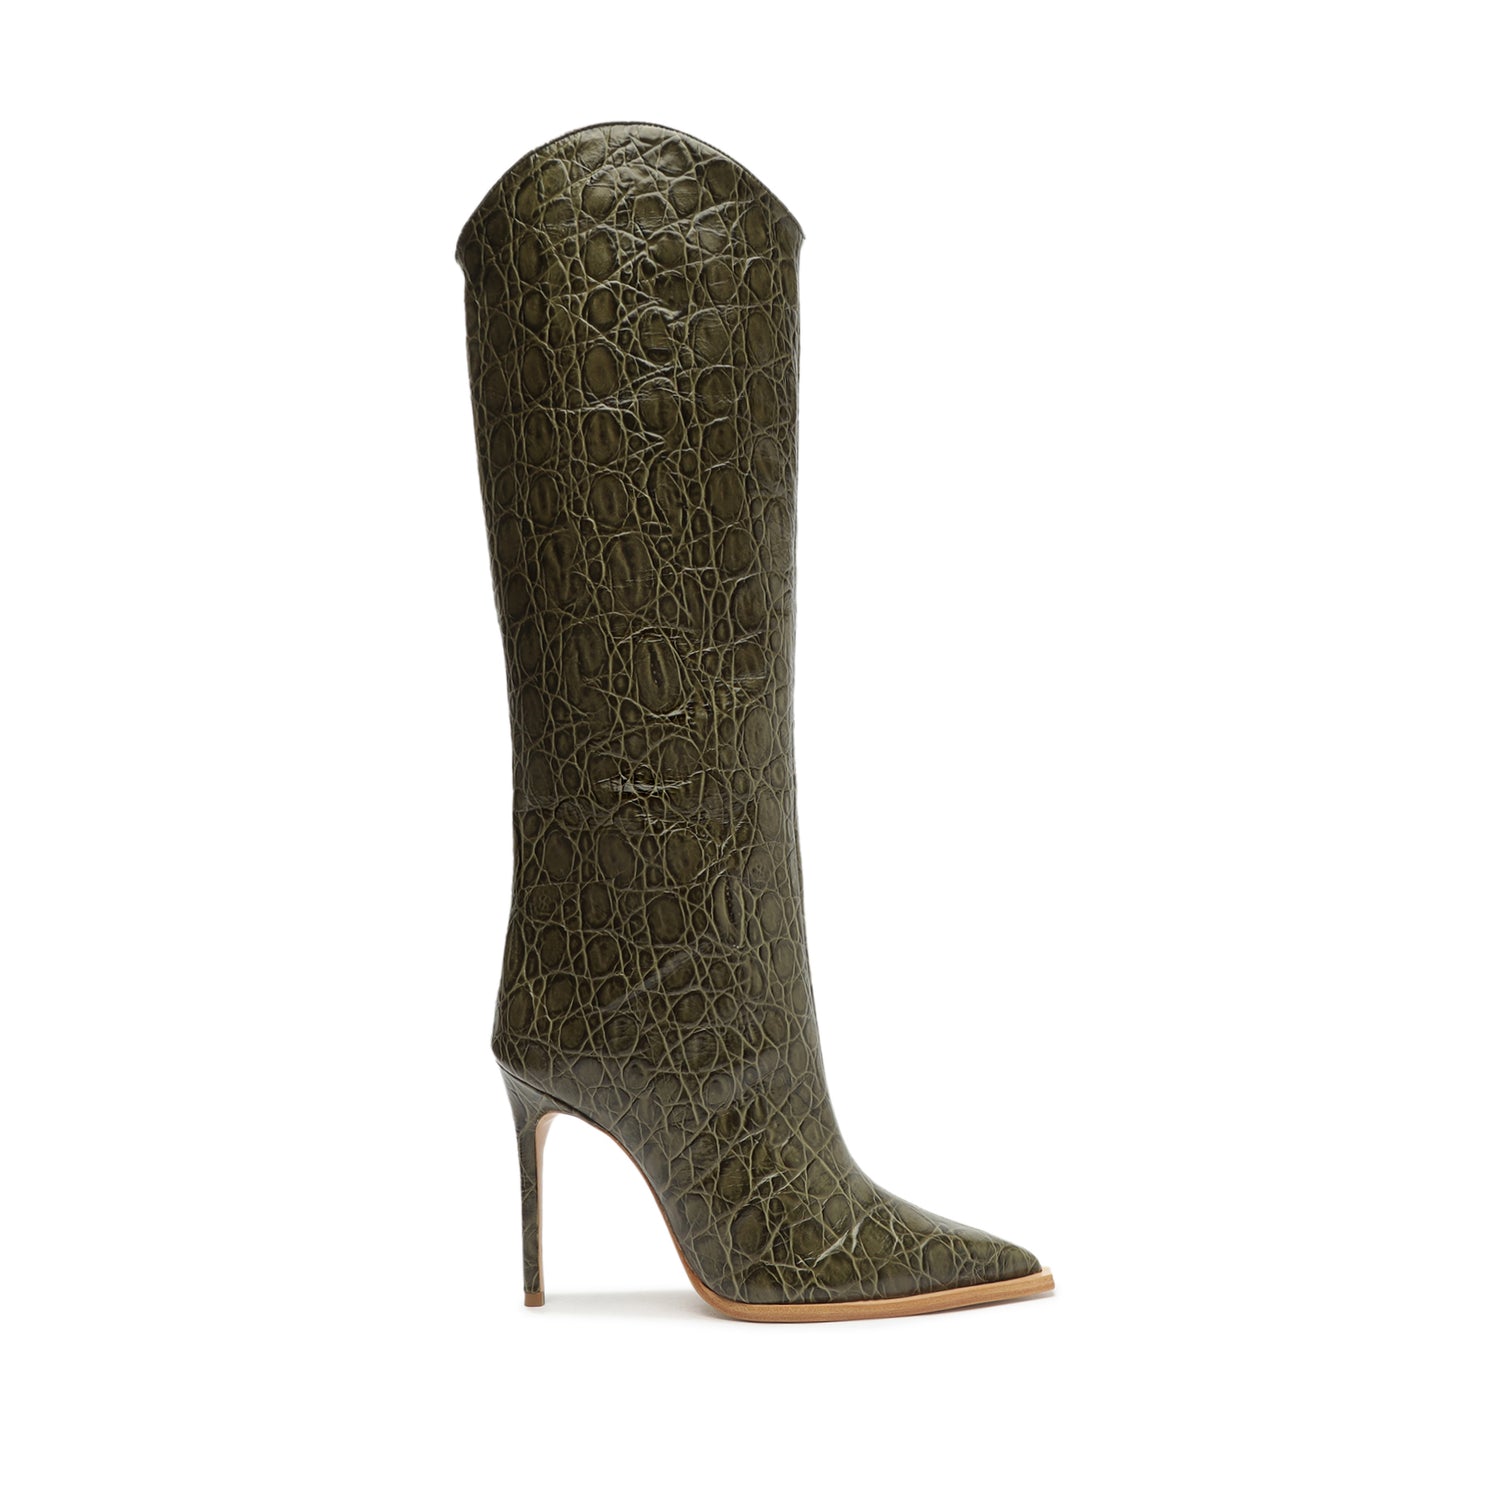 Maryana Welt Wild Leather Boot Boots Open Stock 5 Military Green Crocodile-Embossed Leather - Schutz Shoes